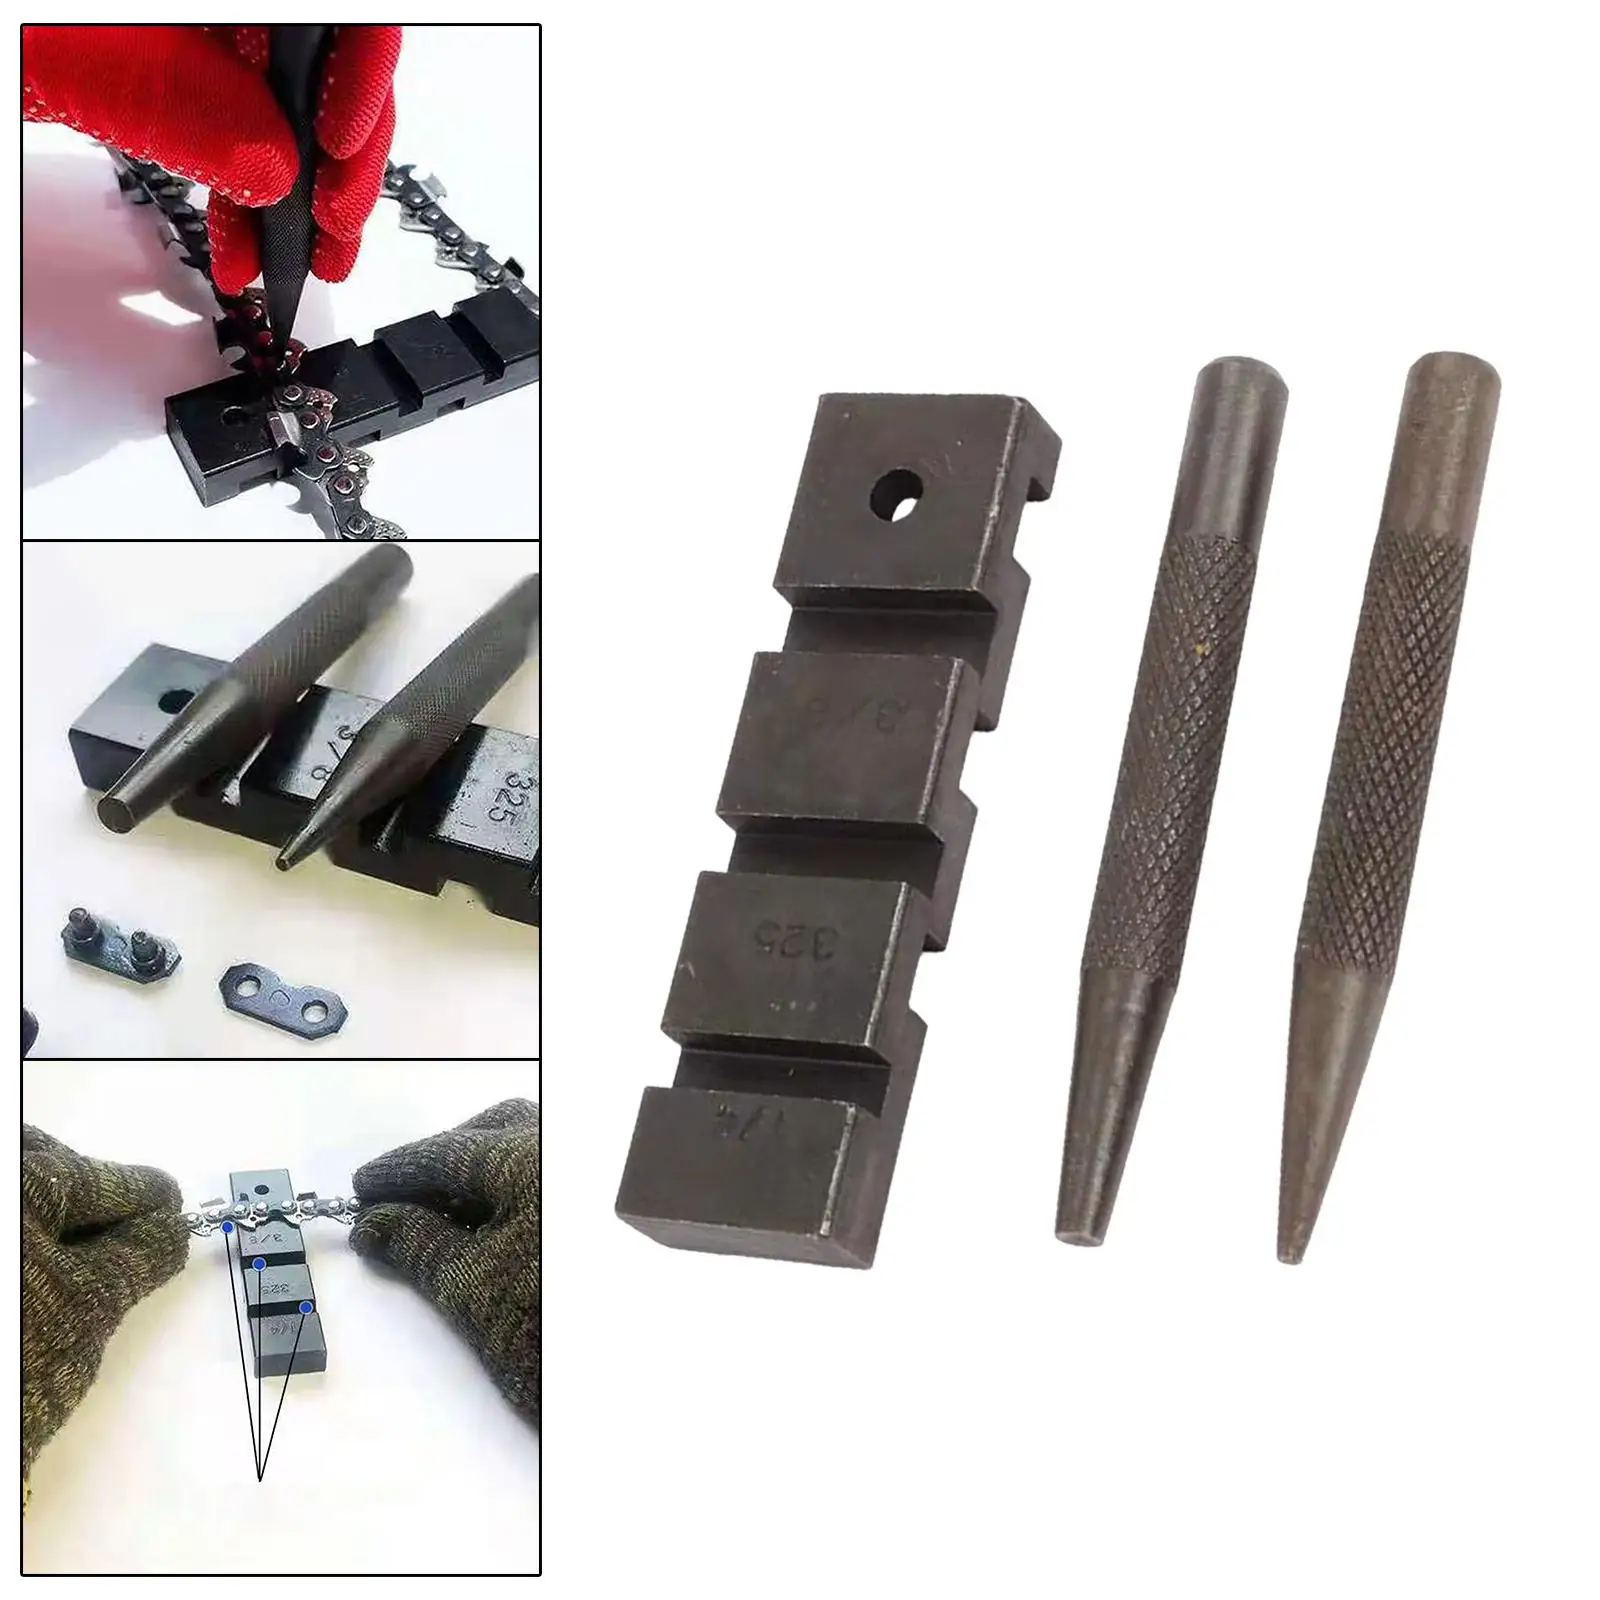 Chainsaw Removal Breaker Repairing Tools Set Chains Breaker for Garage